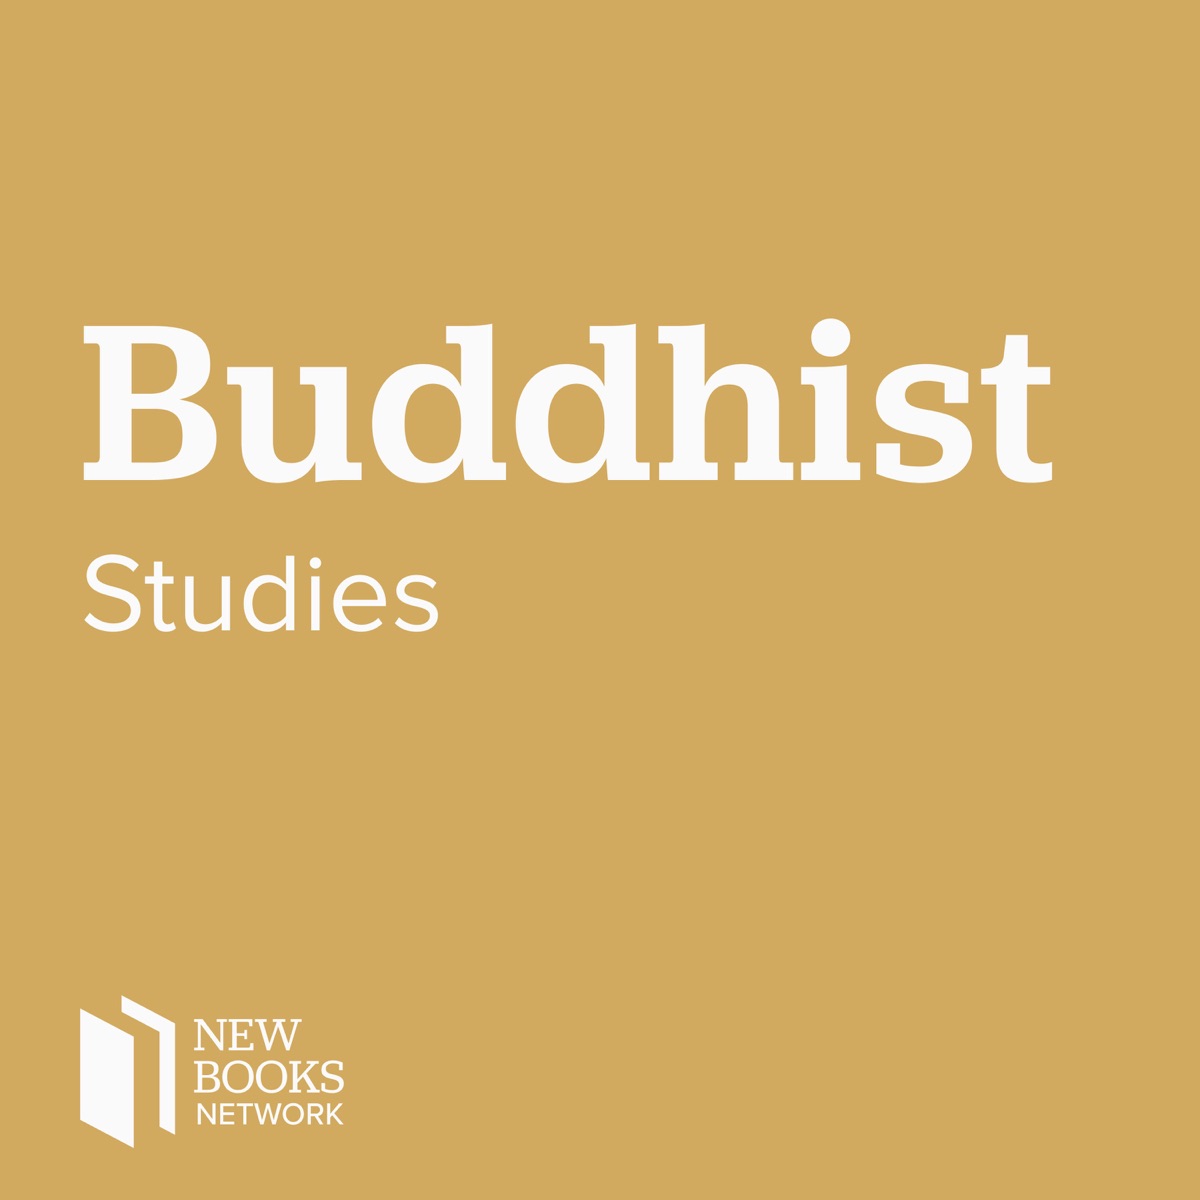 New Books in South Asian Studies – Podcast – Podtail